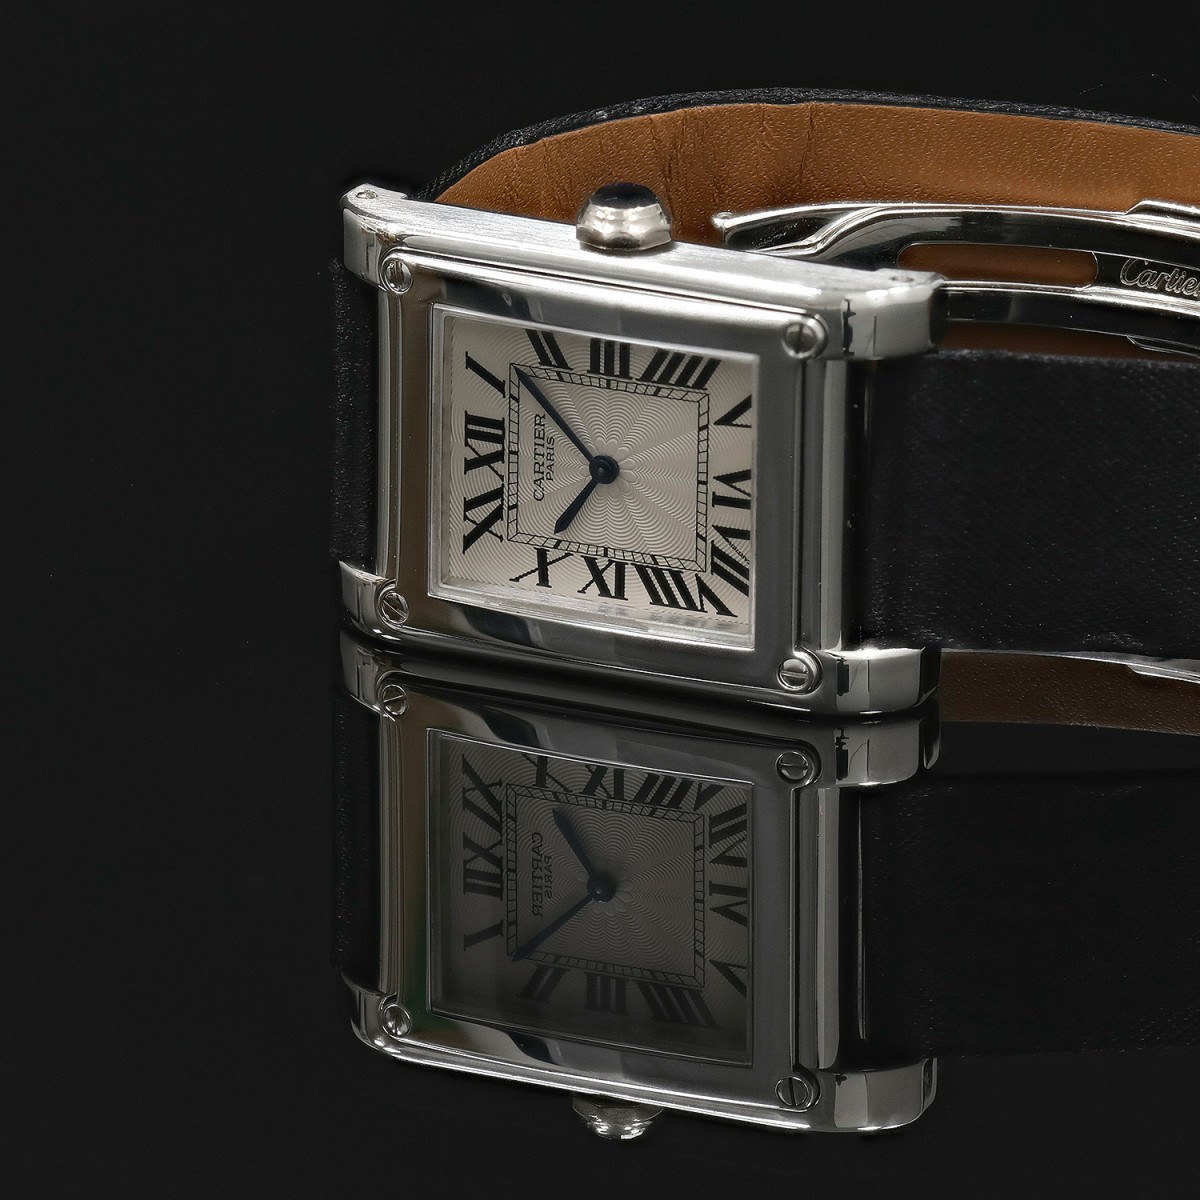 cartier collection privee watches